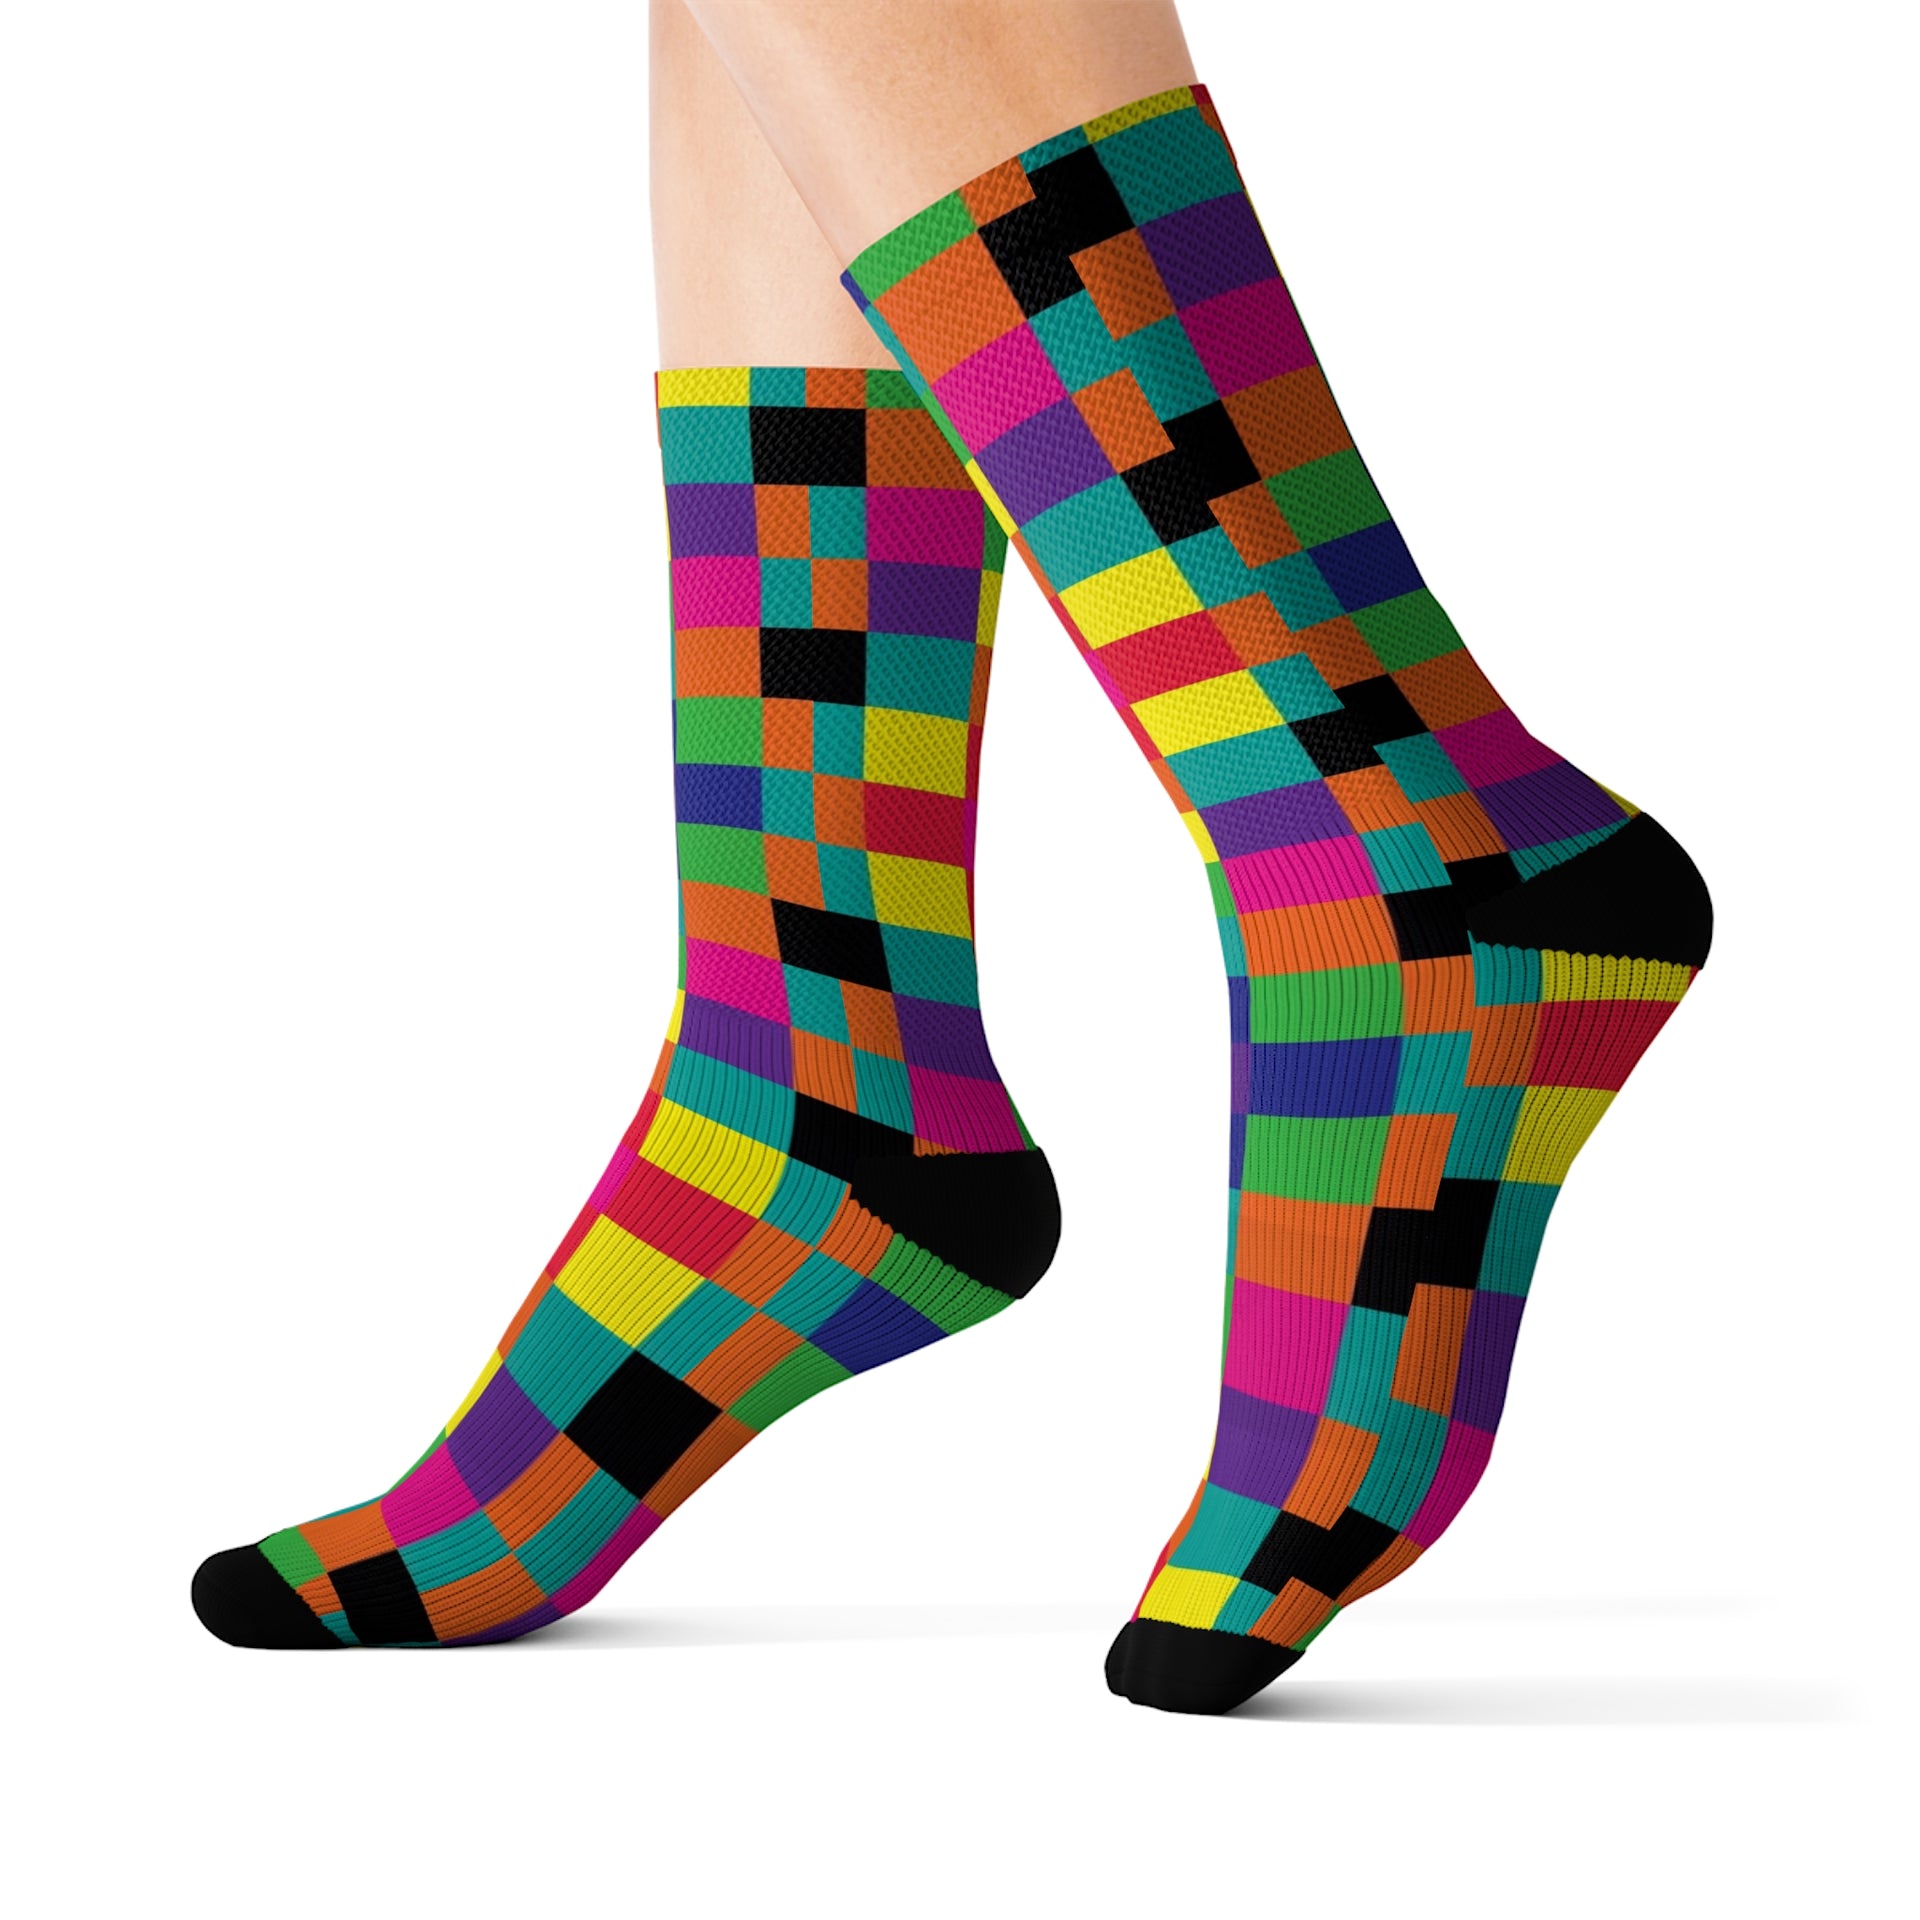 woo W embroidered socks bundle – Artefacts of Planet Woo